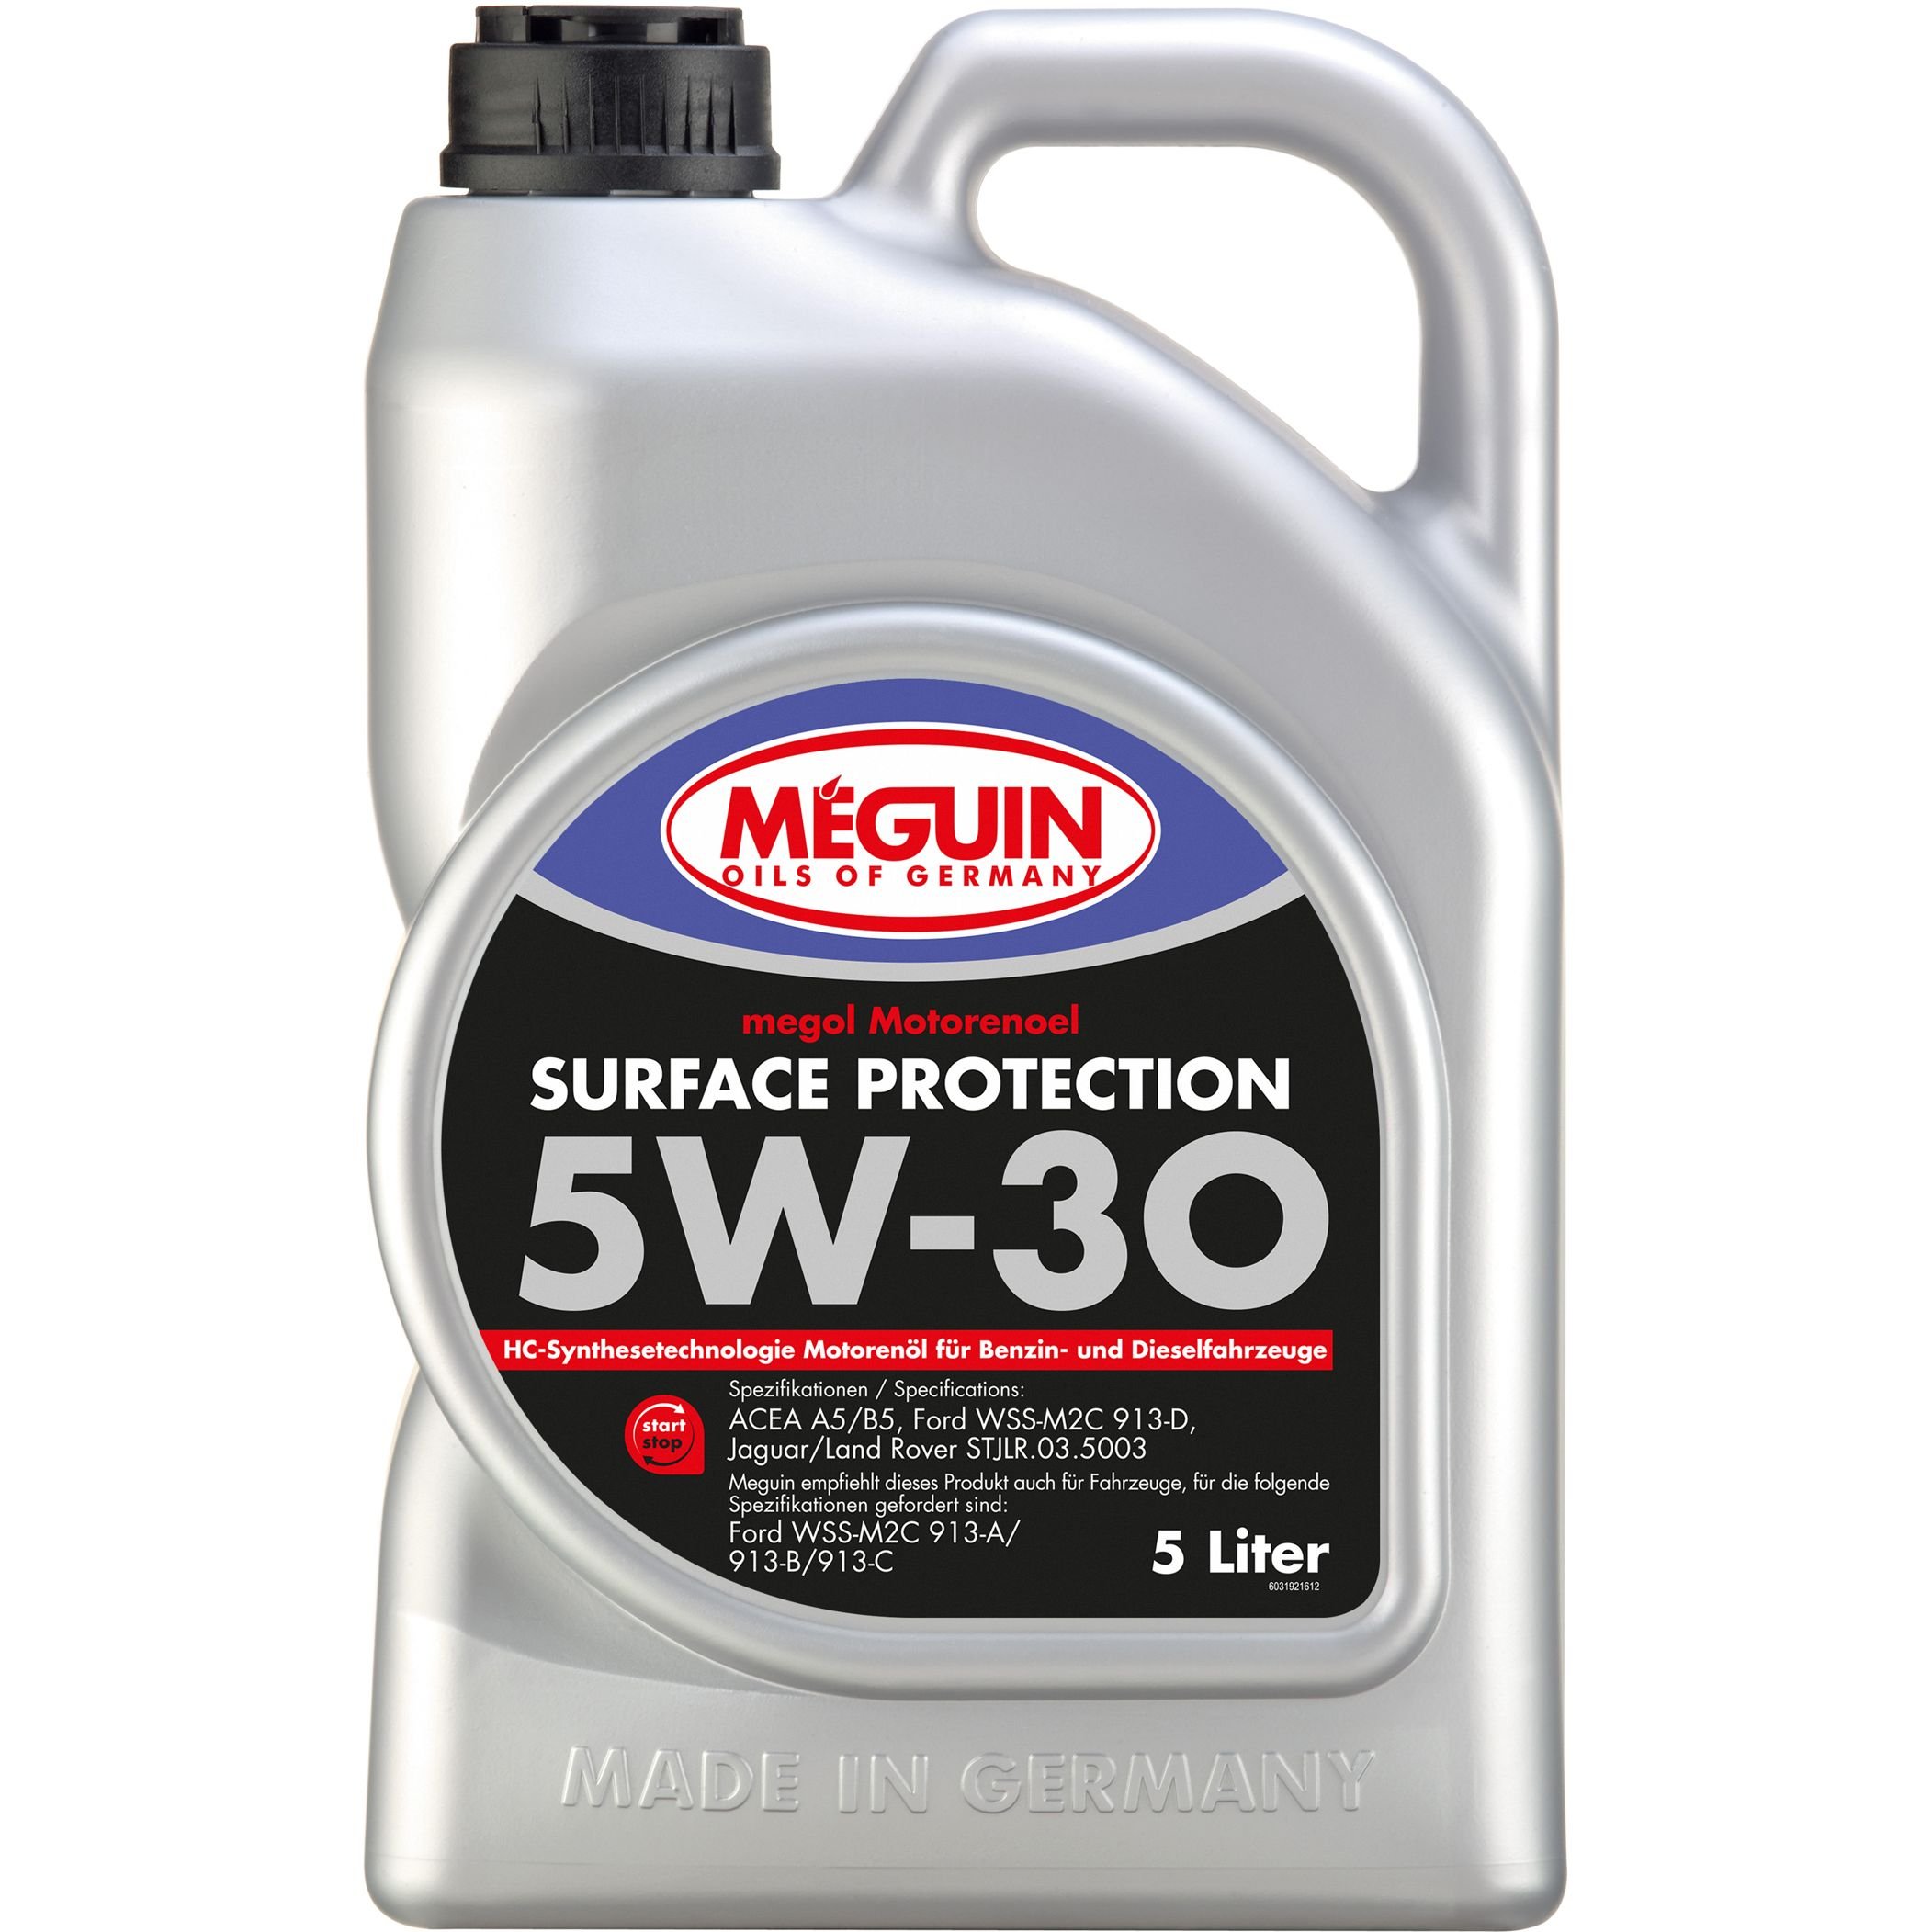 Моторное масло Meguin Surface Protection 5W-30 5 л - фото 1